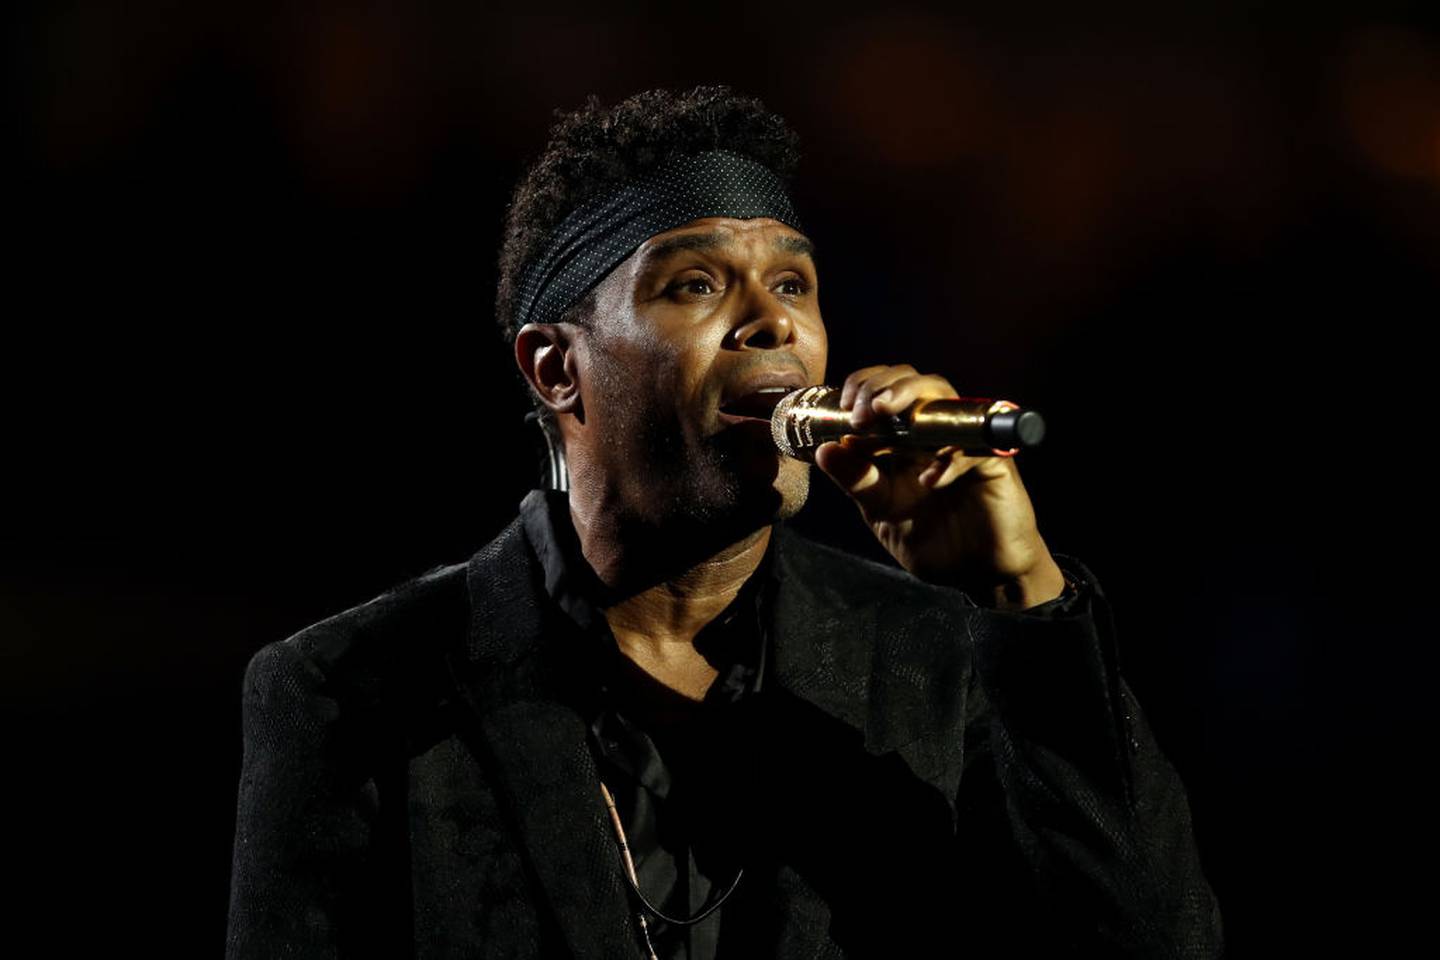 NEW YORK, NY - AUGUST 27:  Singer-songwriter Maxwell performs the National Anthem during the opening night ceremony at Arthur Ashe Stadium on Day One of the 2018 US Open at the USTA Billie Jean King National Tennis Center on August 27, 2018 in the Flushing neighborhood of the Queens borough of New York City.